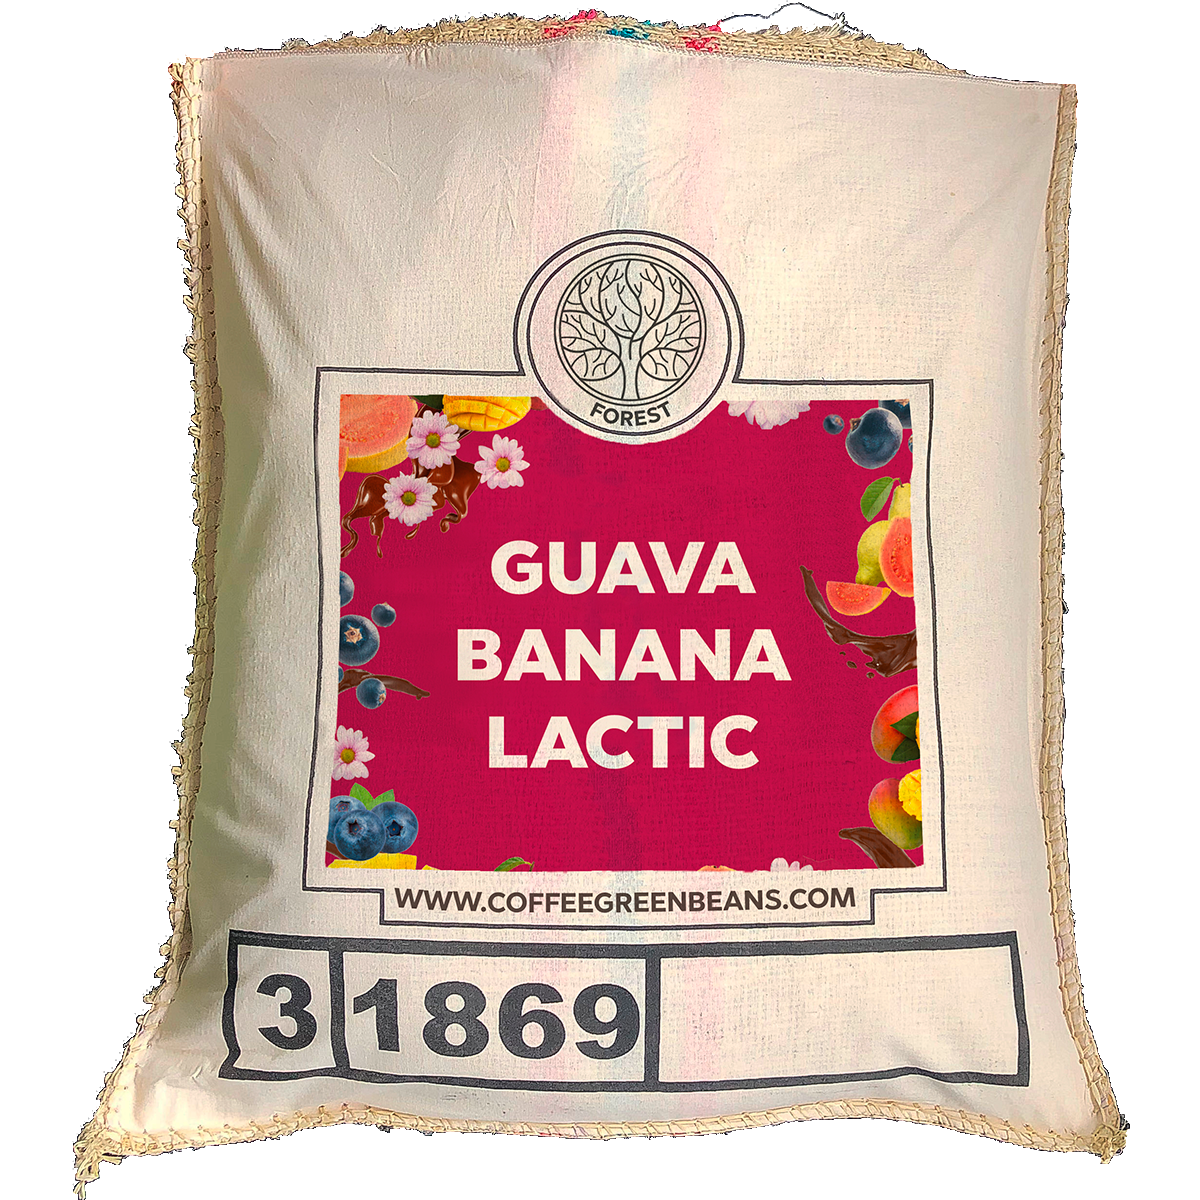 GUAVA BANANA LACTIC - Forest Coffee 